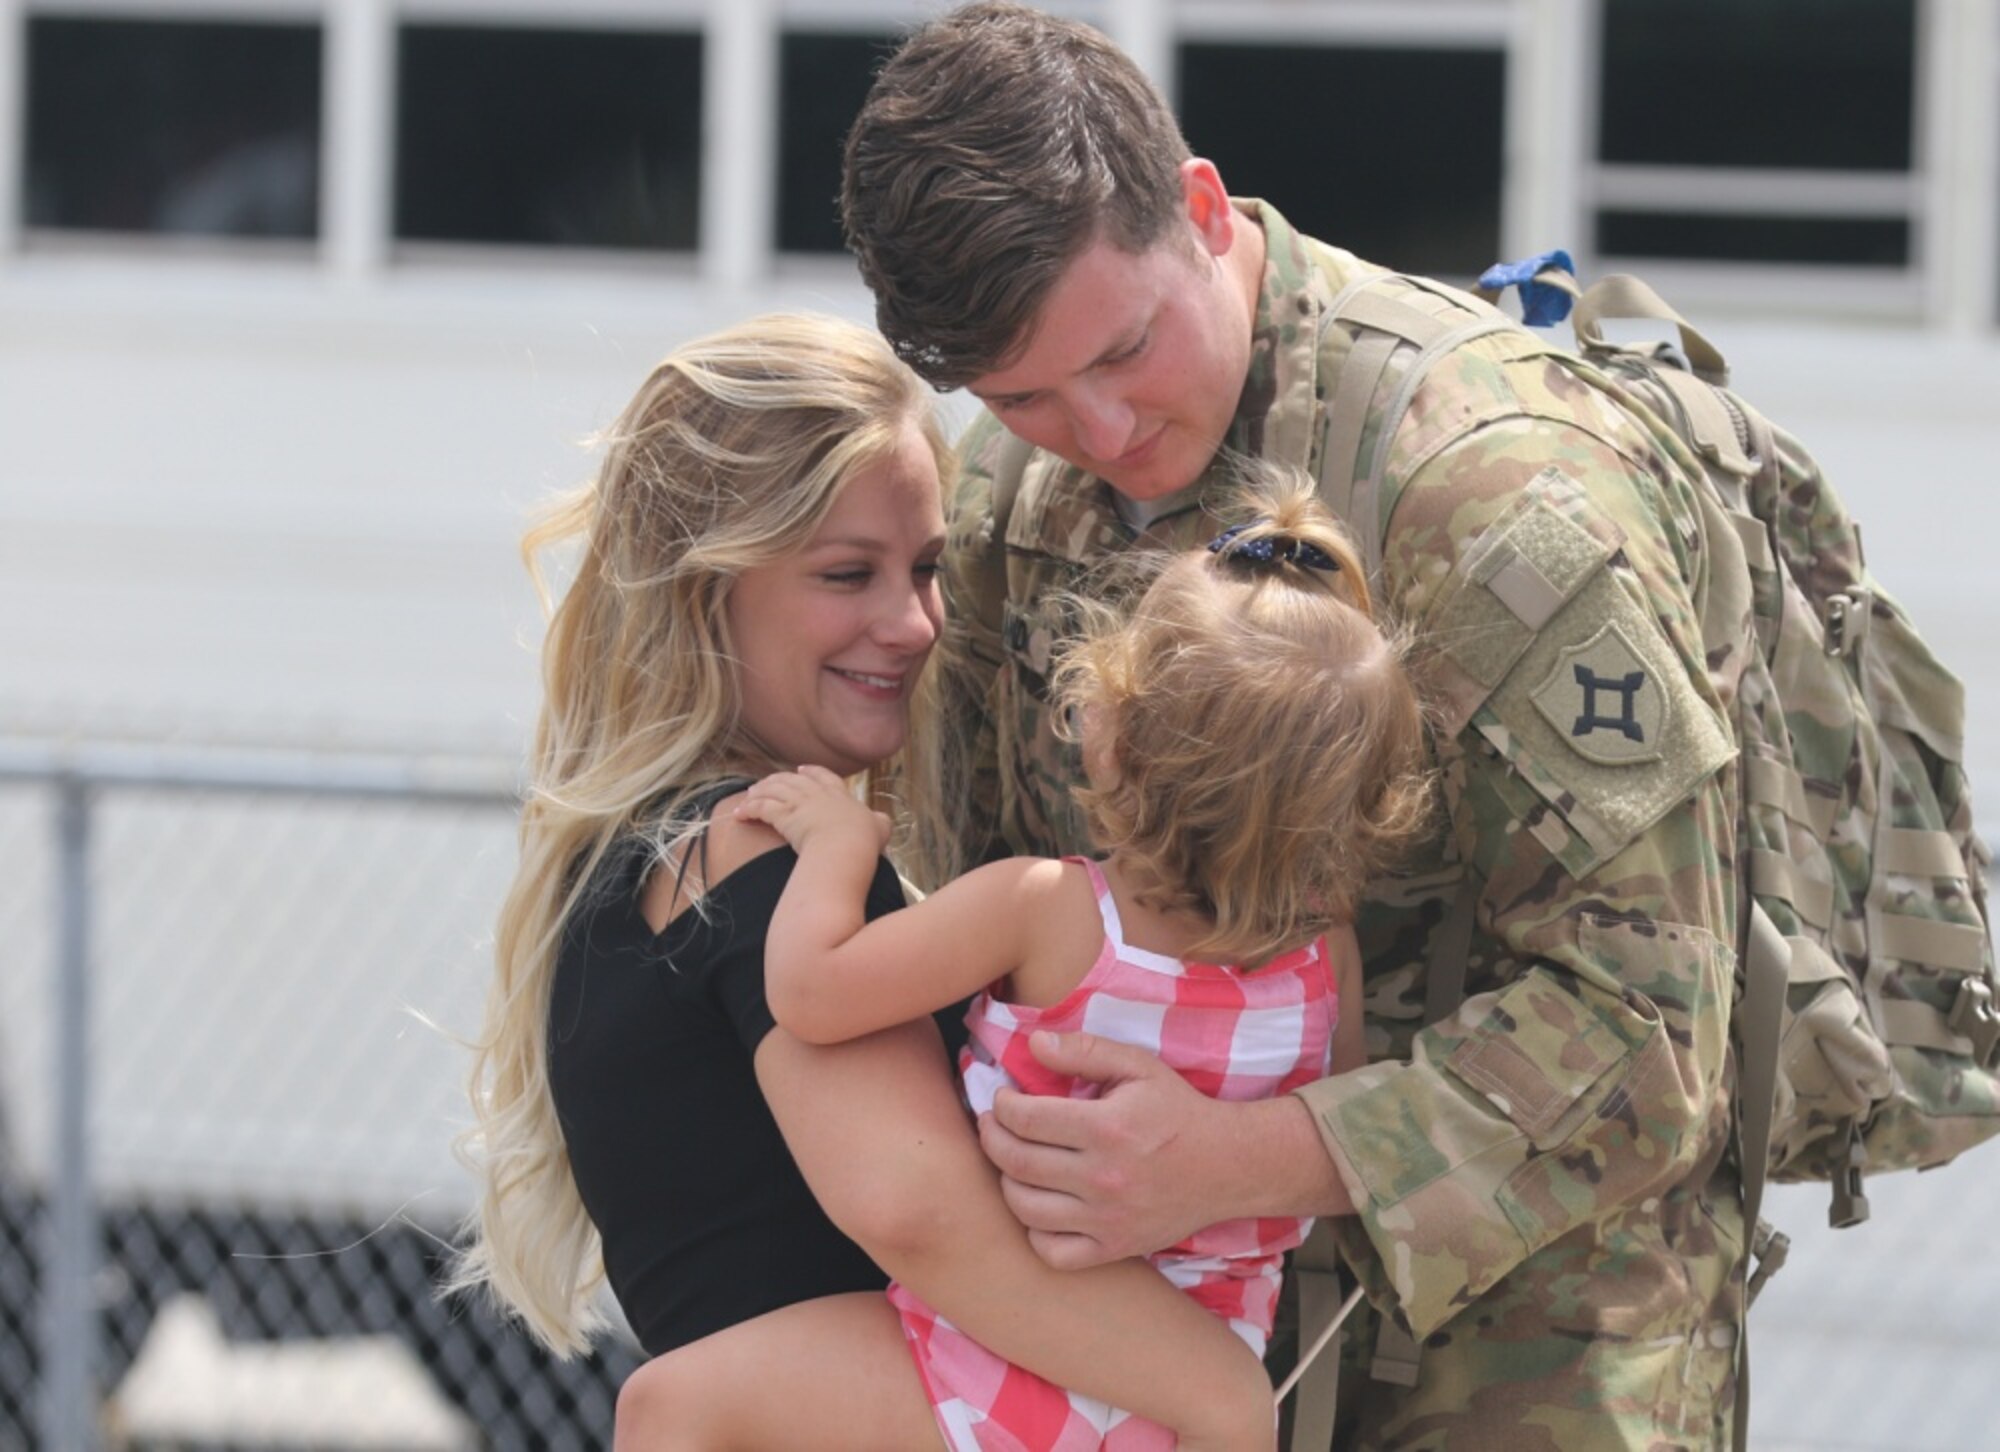 Spc. Alexander Rowland greets his wife and daughter at Jacksonville International Airport near Jacksonville, Florida, on April 29, 2017, after returning from a deployment. The DOD announced on Aug. 13, 2018 that eligibility for Military OneSource benefits for service members and their families has been extended from the current 180 days to 365 days after separation or retirement from military service.  (Photo Credit: U.S. Army photo by Staff Sgt. Shane Klestinski)